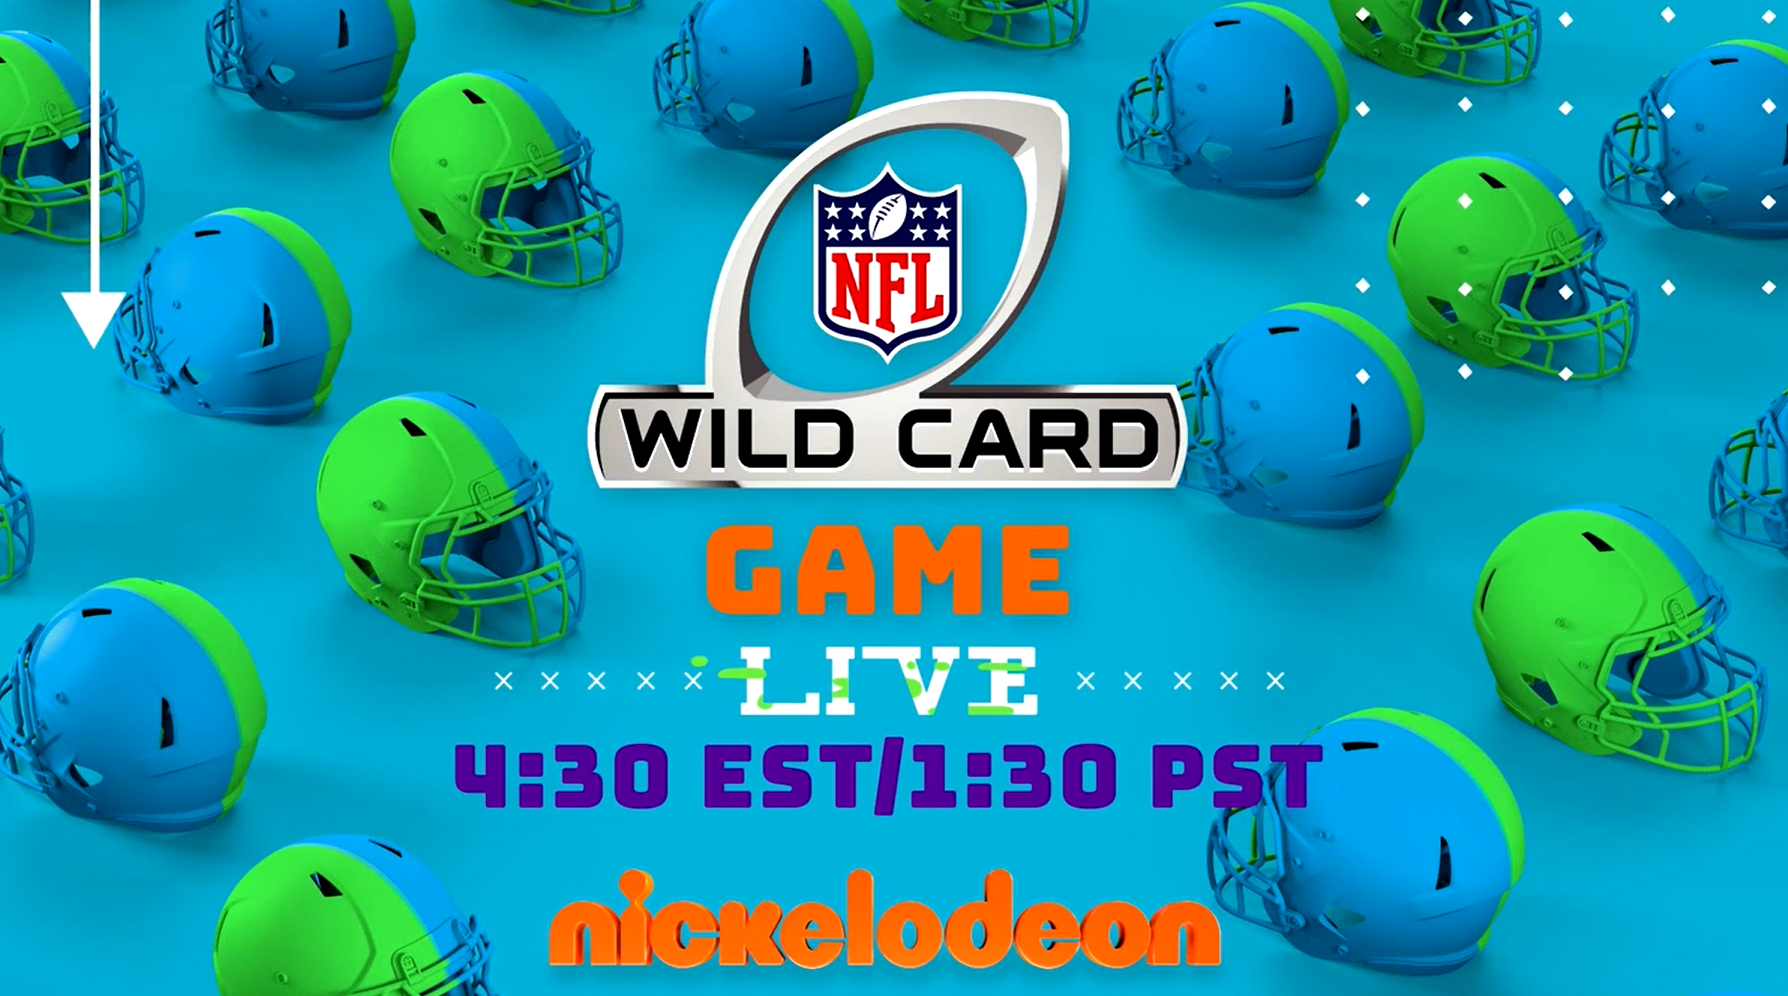 CBS Sports, Nickelodeon Unleash Second Slime-Filled NFL Wild Card